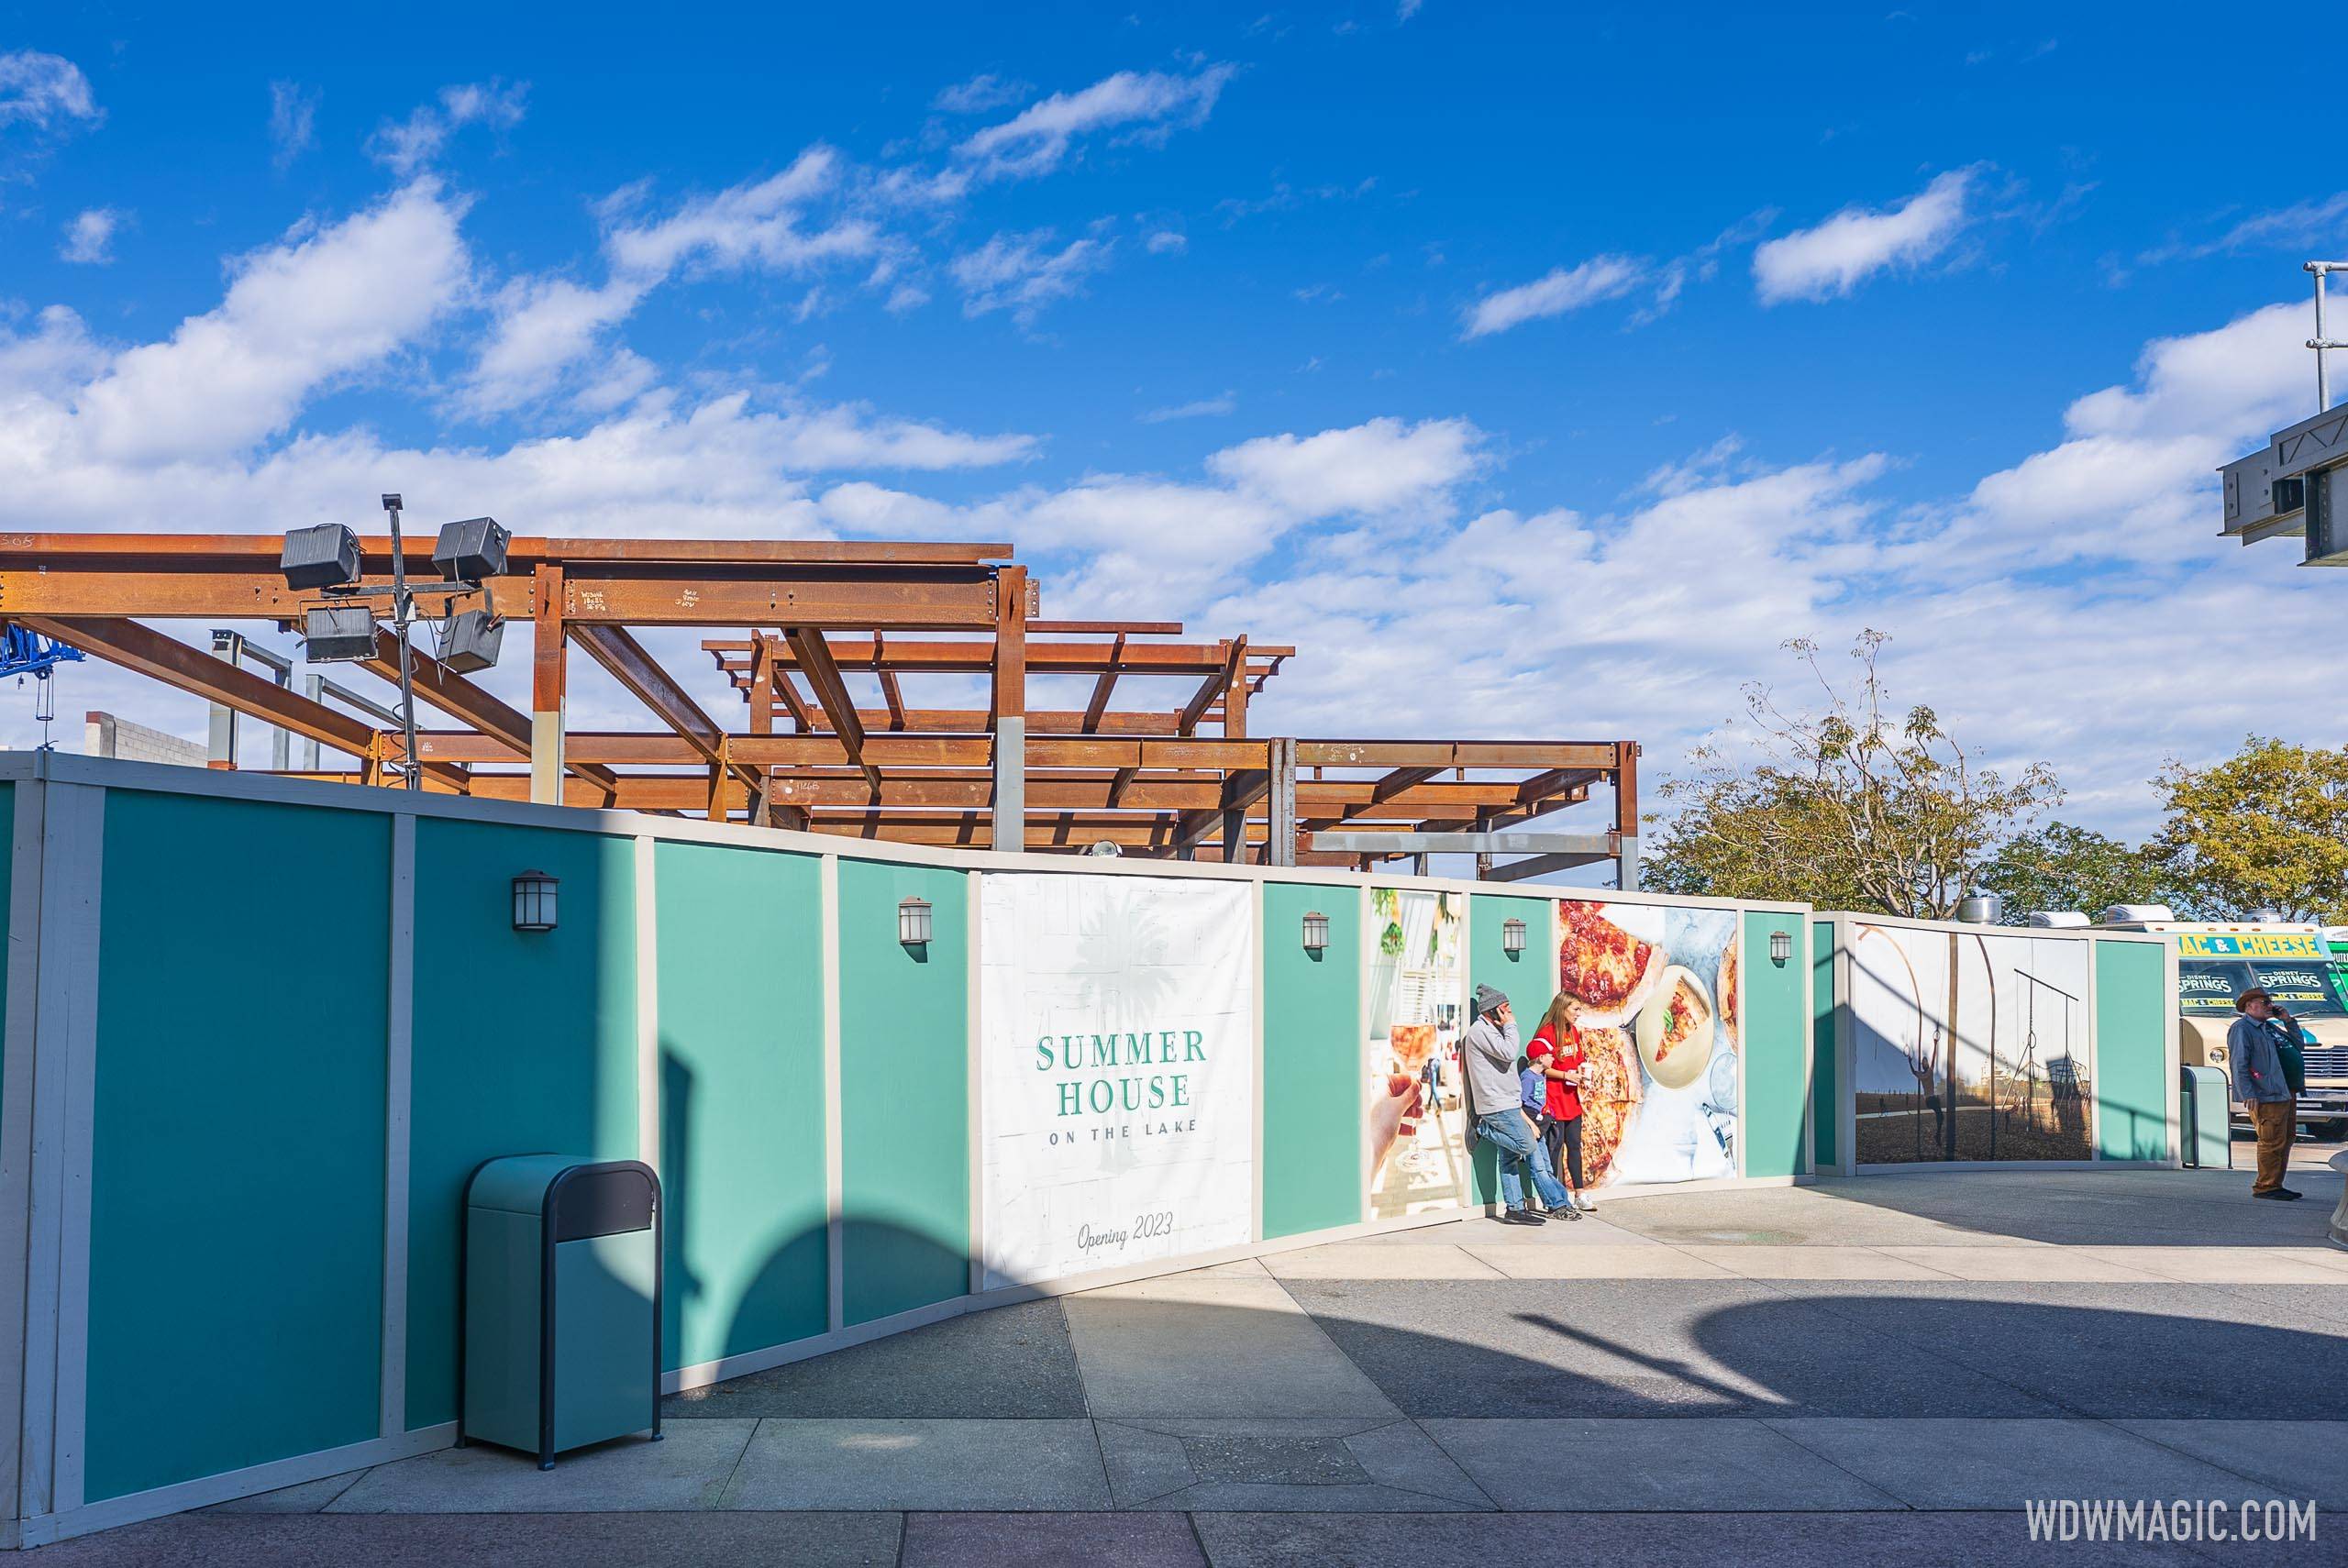 'Summer House on the Lake' construction update from Disney Springs